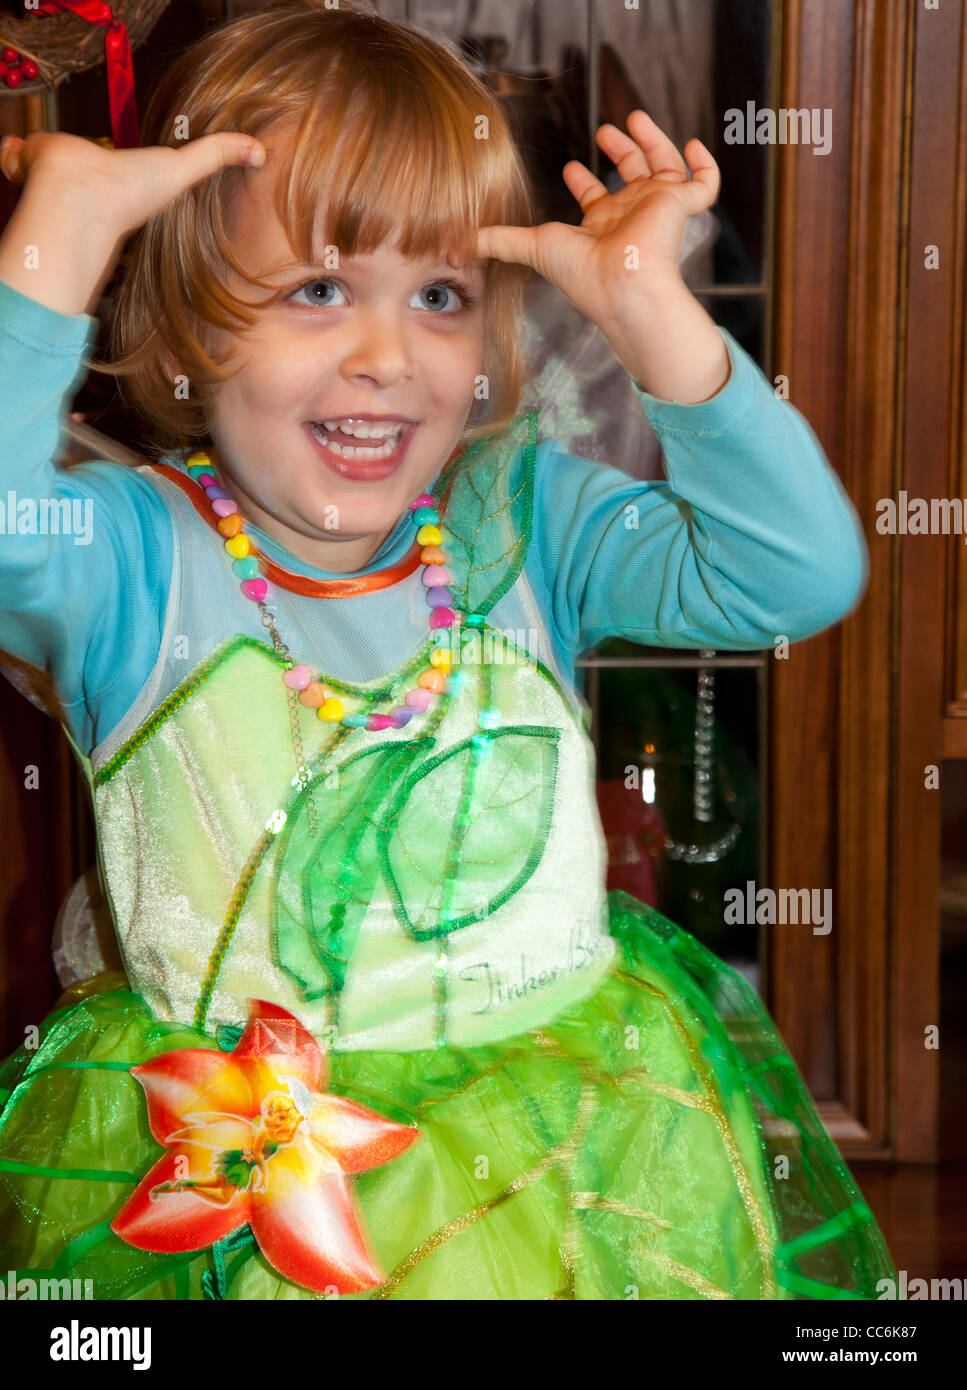 Child dressed in Tinker Bell outfit Stock Photo